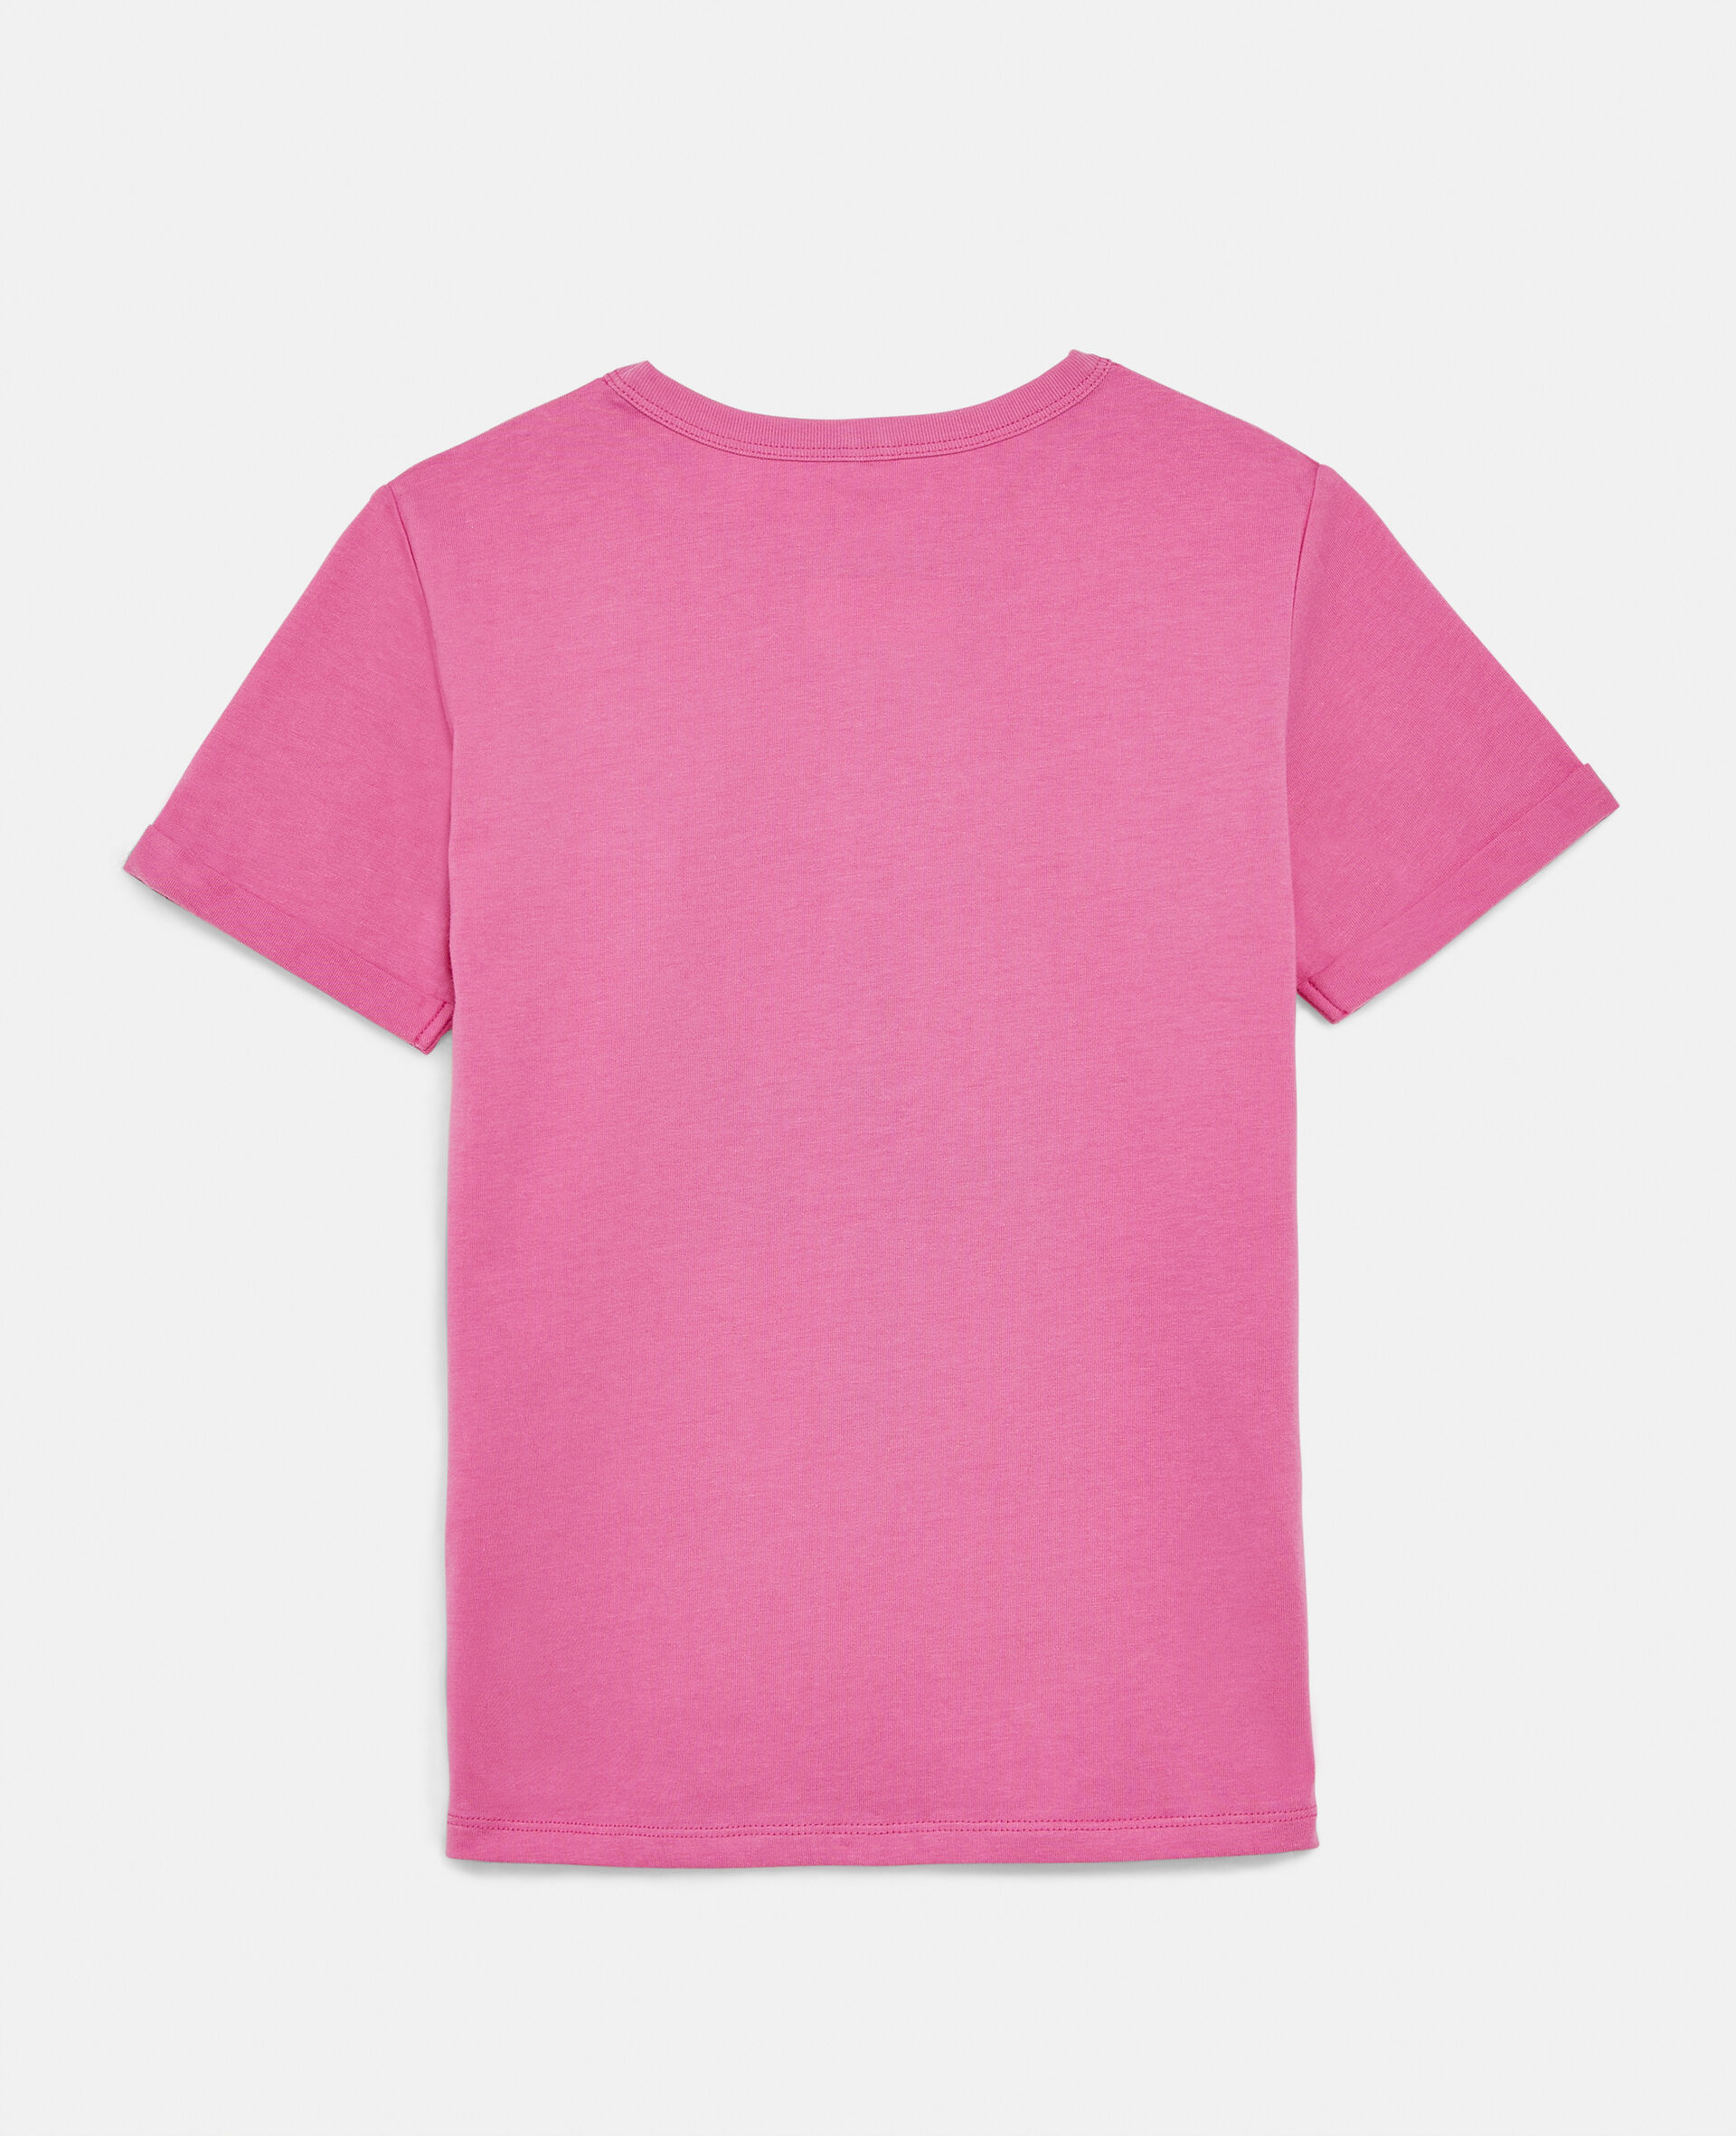 Ice Lolly Print Cotton T-Shirt-Pink-large image number 2